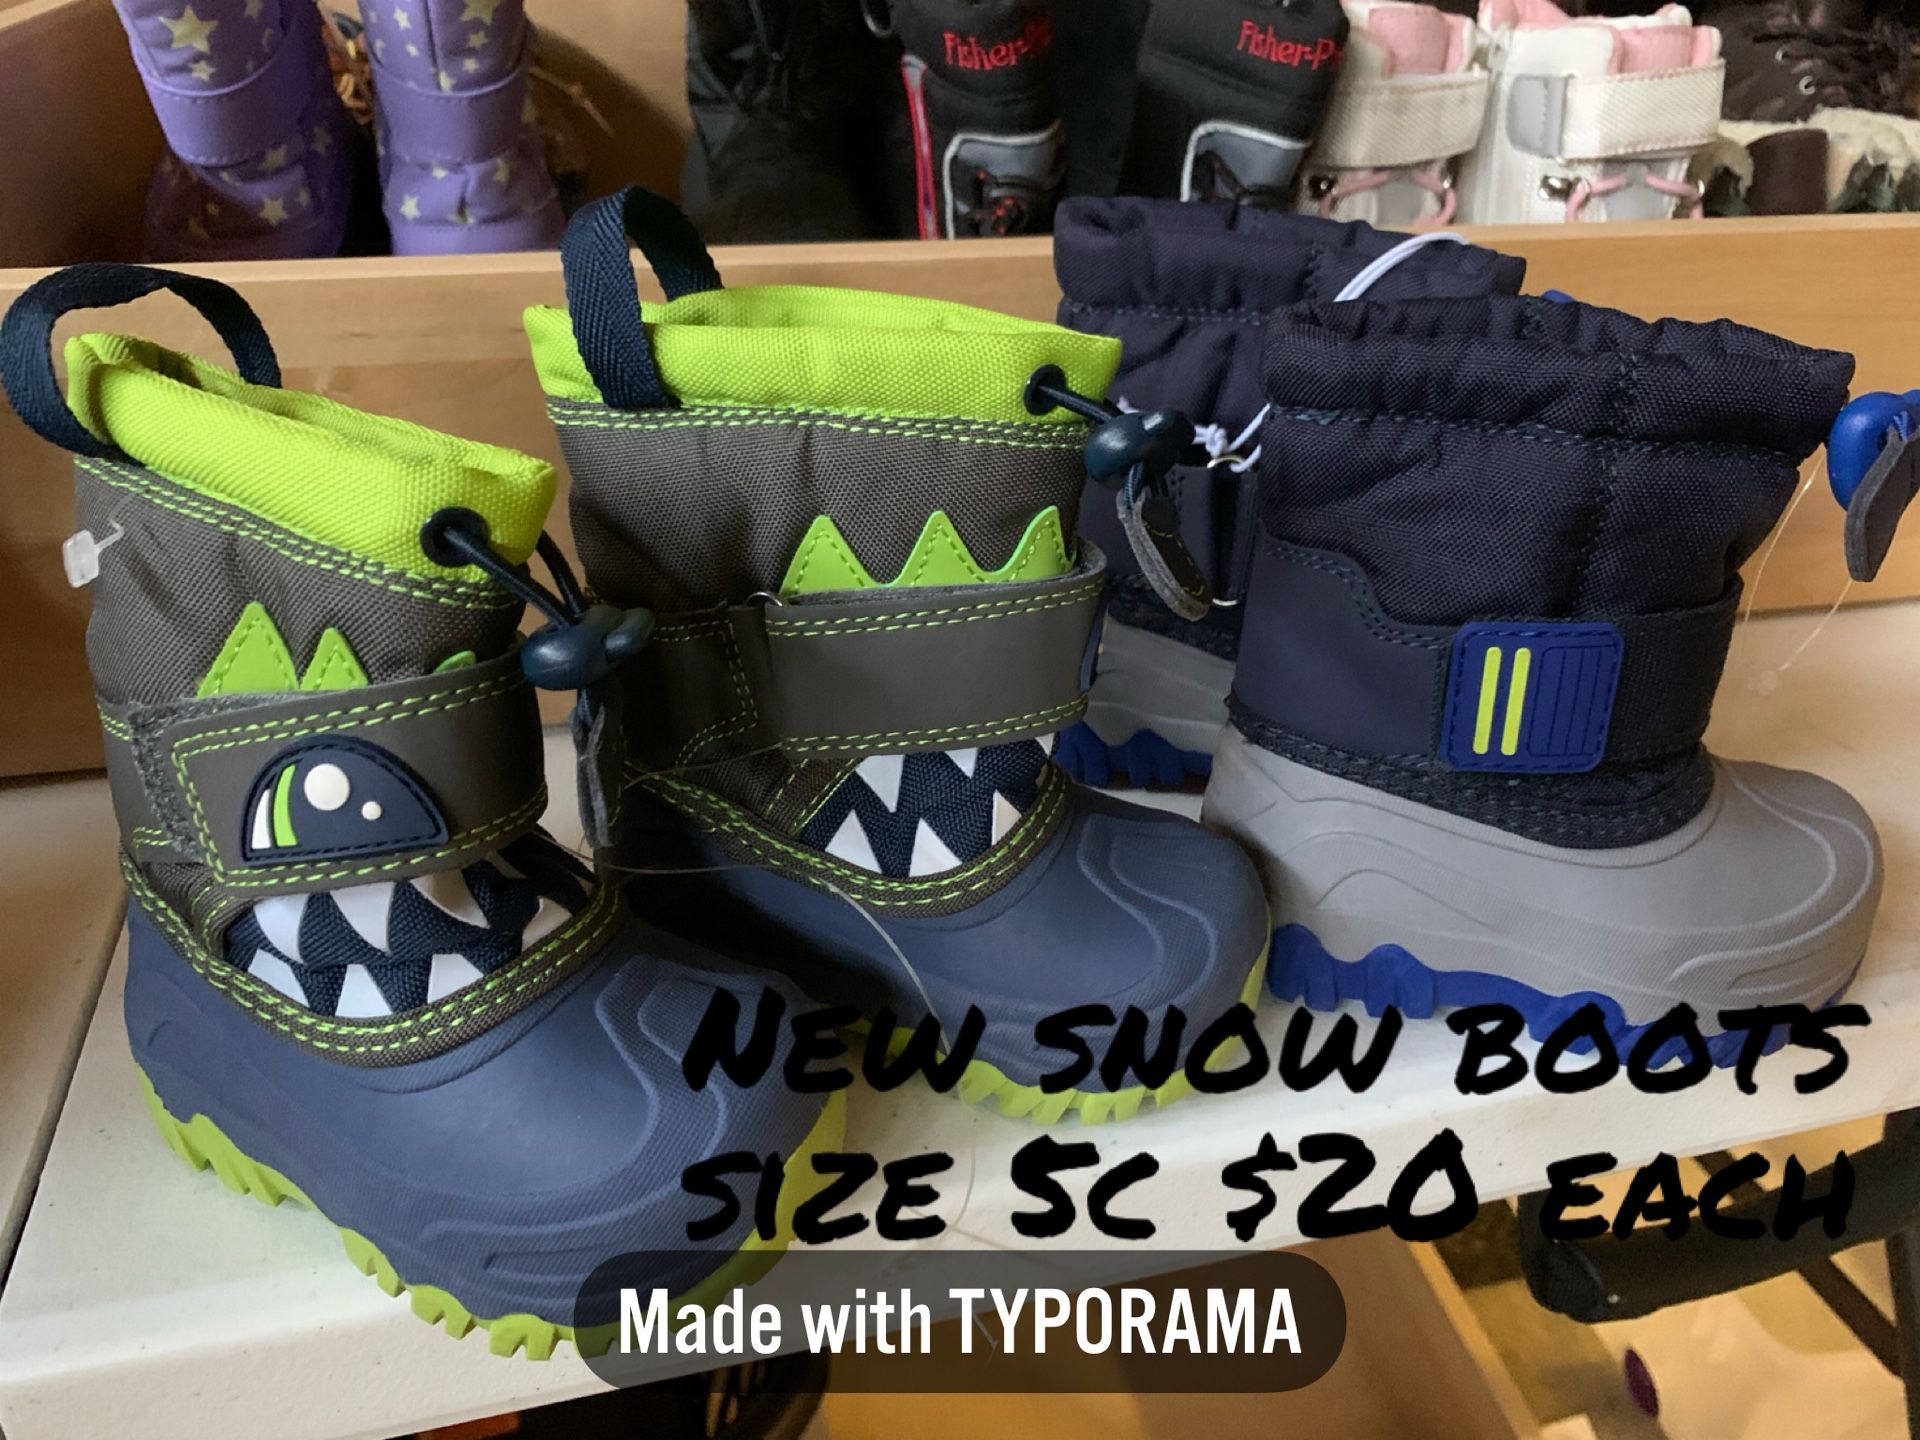 Snow boots size 5c small kids